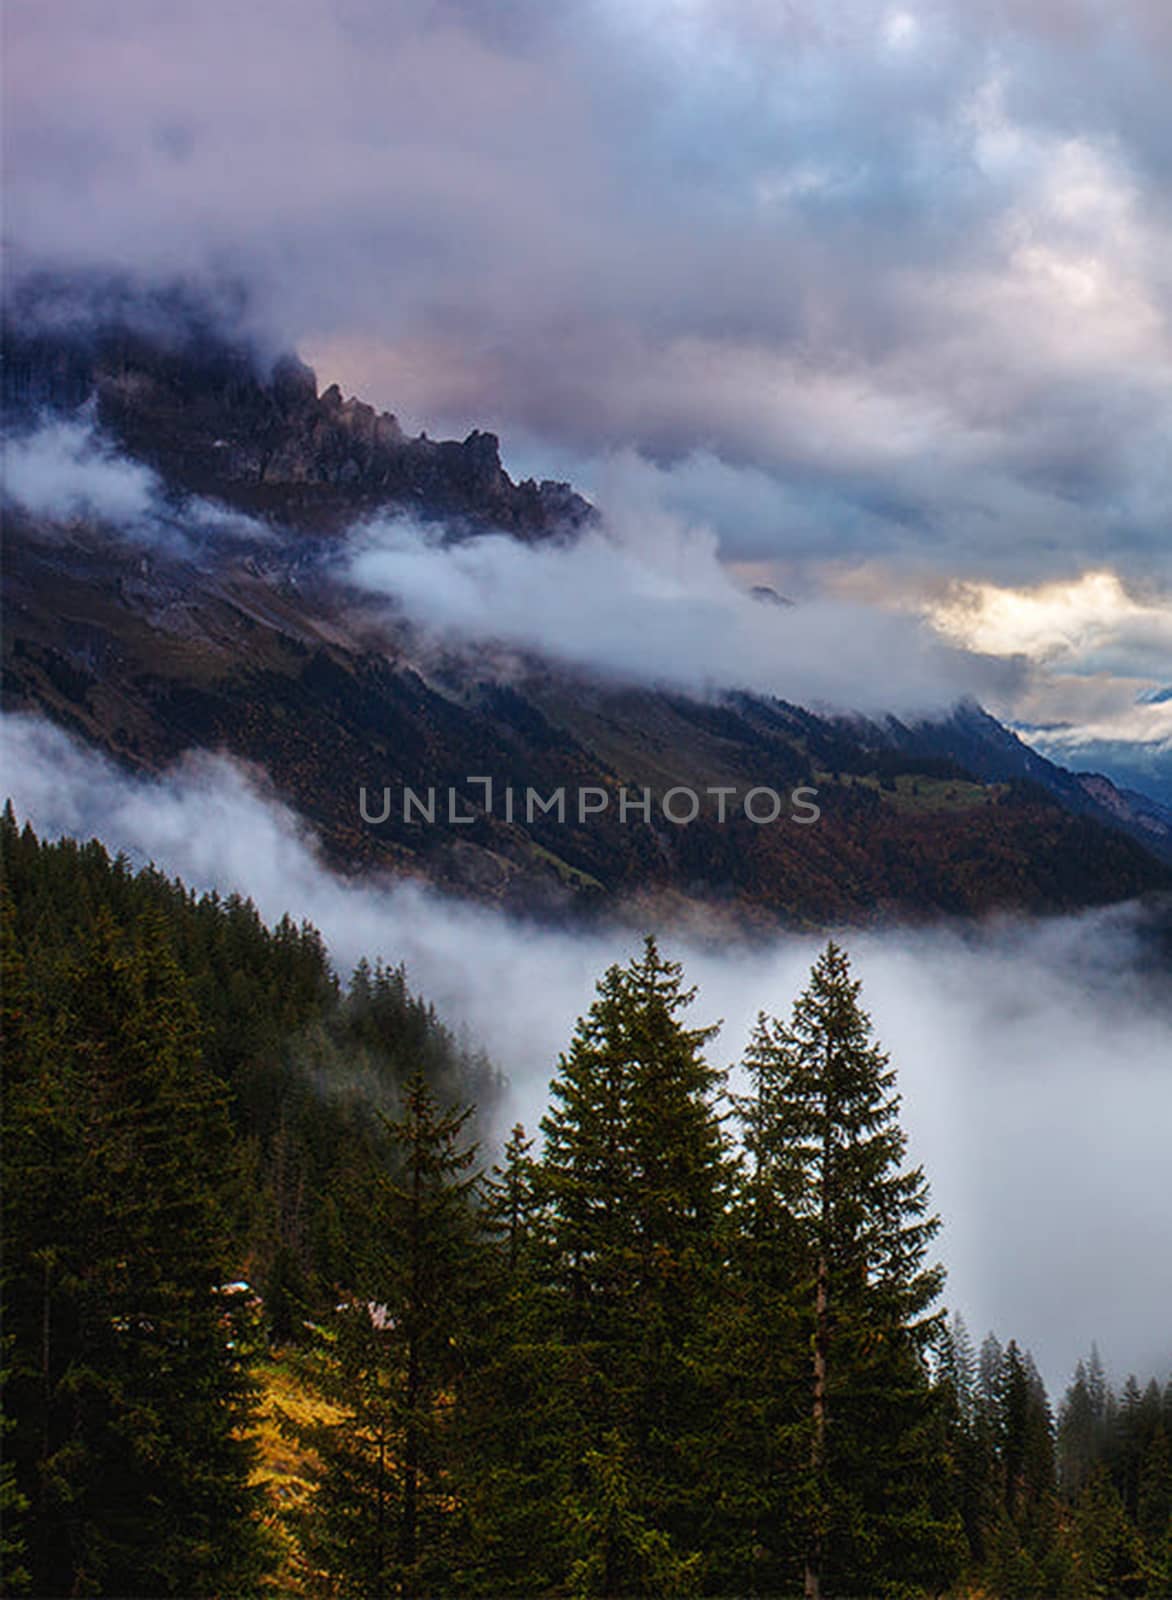 Beautiful pictures of  Switzerland by TravelSync27